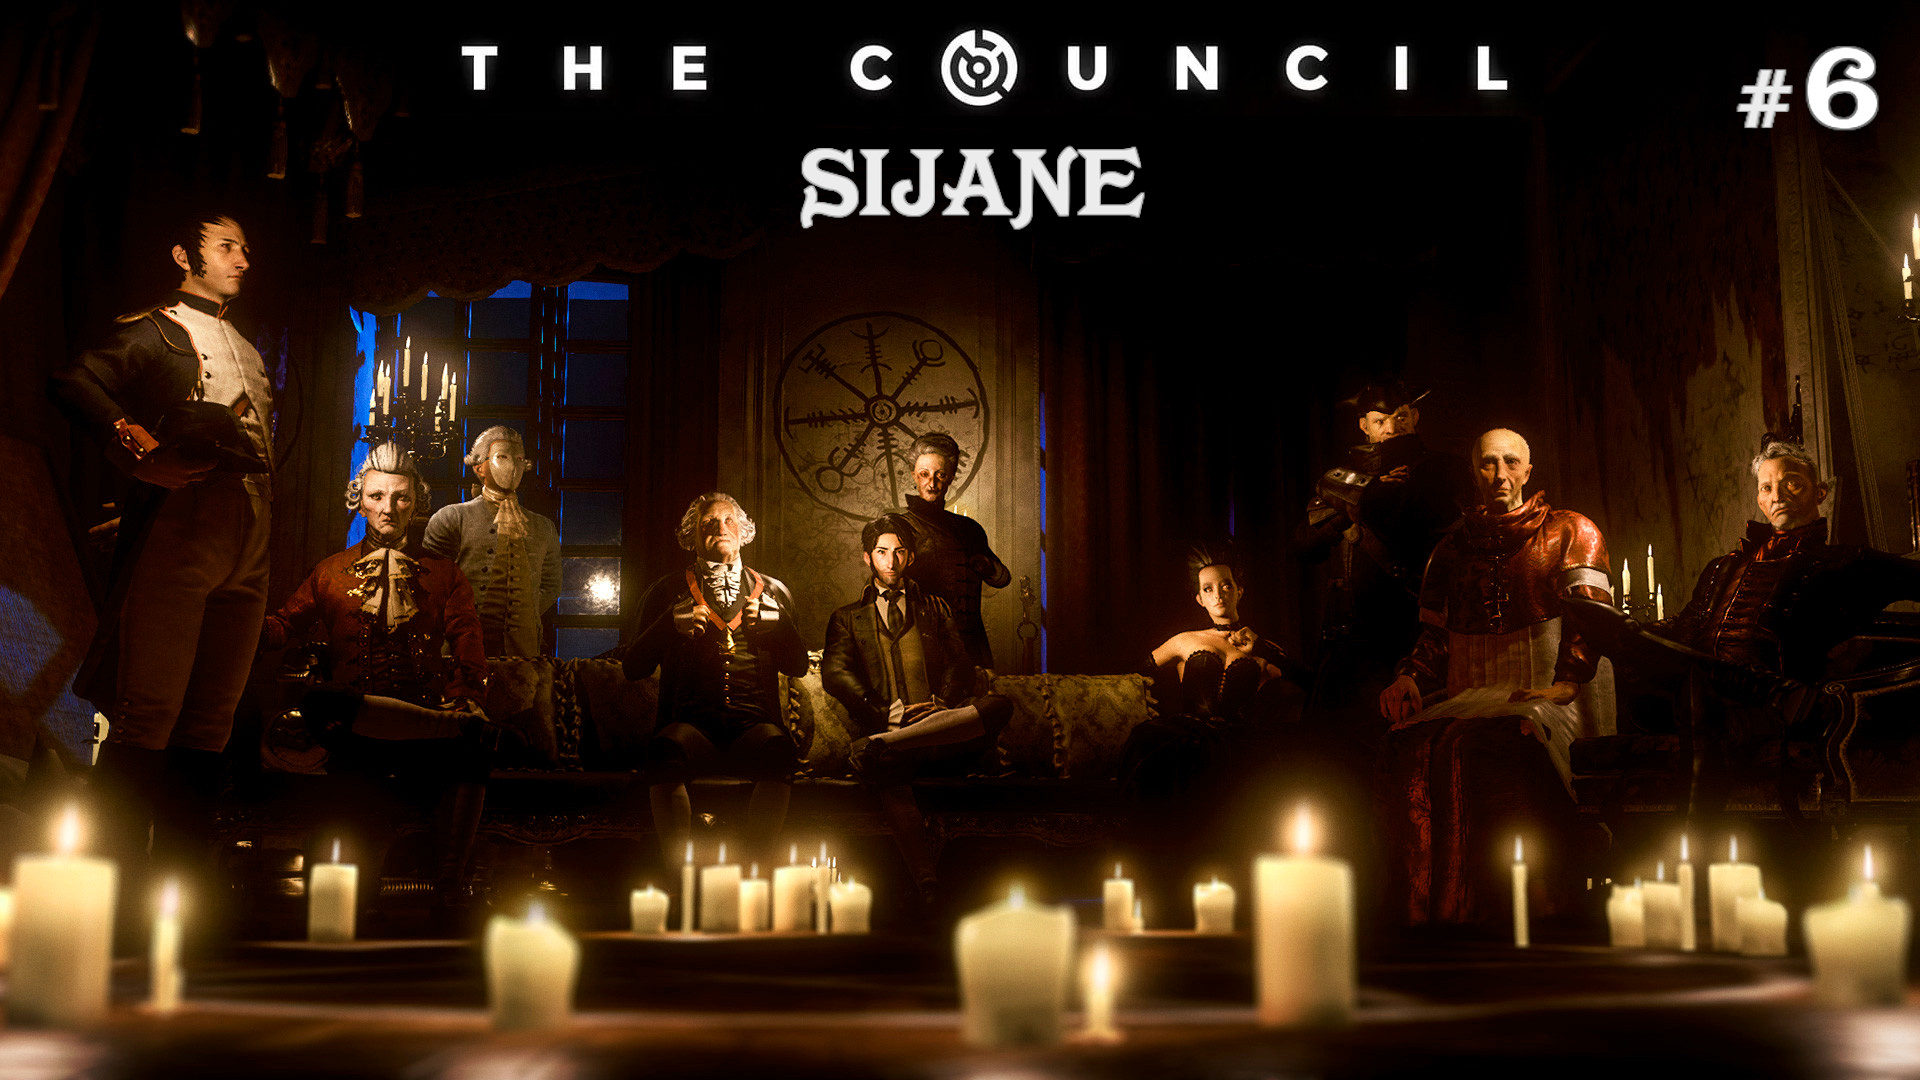 The Council Episode 2 - Hide and Seek #6